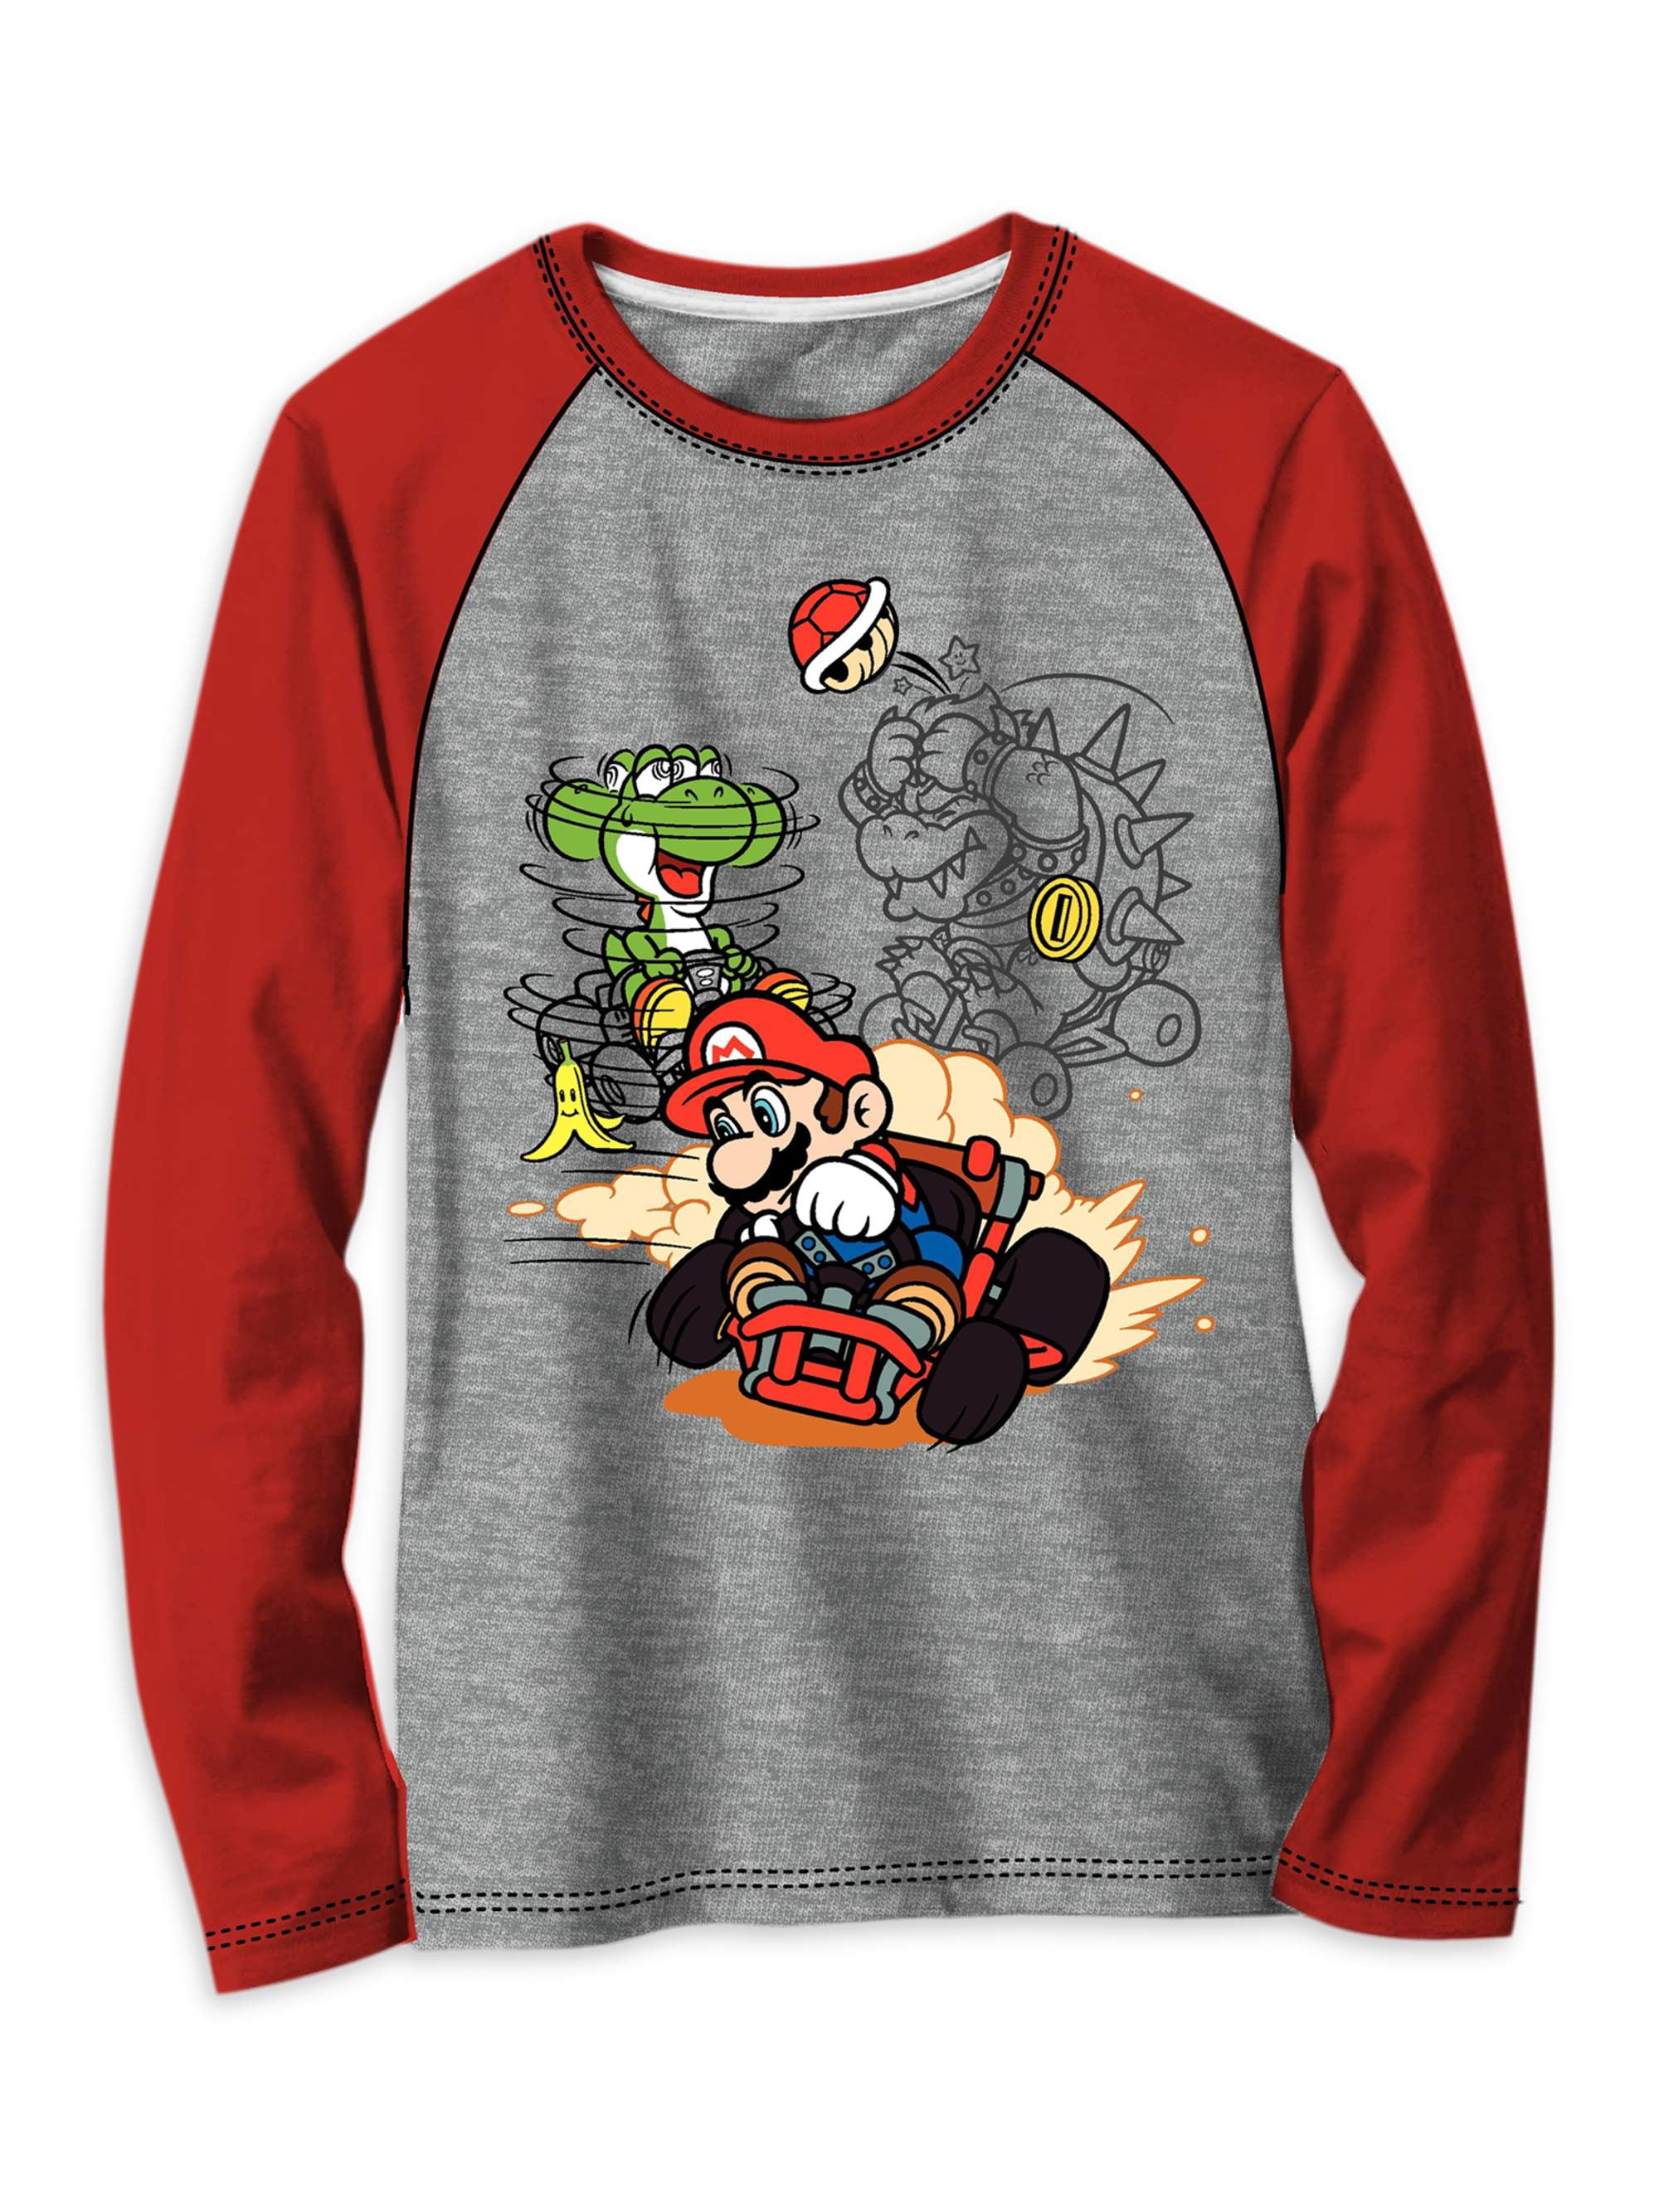 BOYS SIZE XLARGE 16 SUPER MARIO RED CHARACTERS LONG SLEEVE TSHIRT NEW #15754 